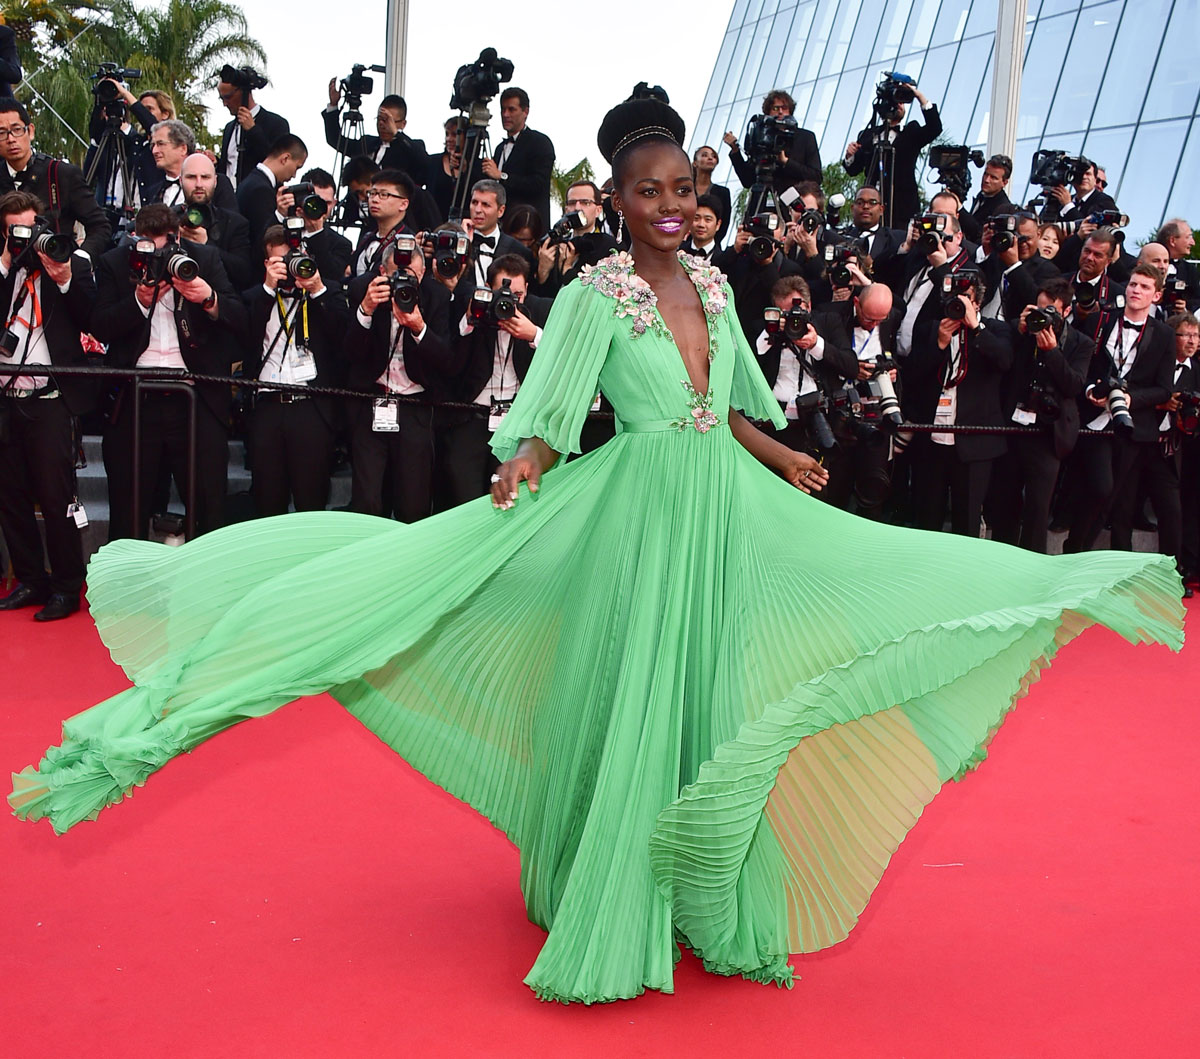 lupita nyong'o twirls in a green pleated gown at the cannes film festival